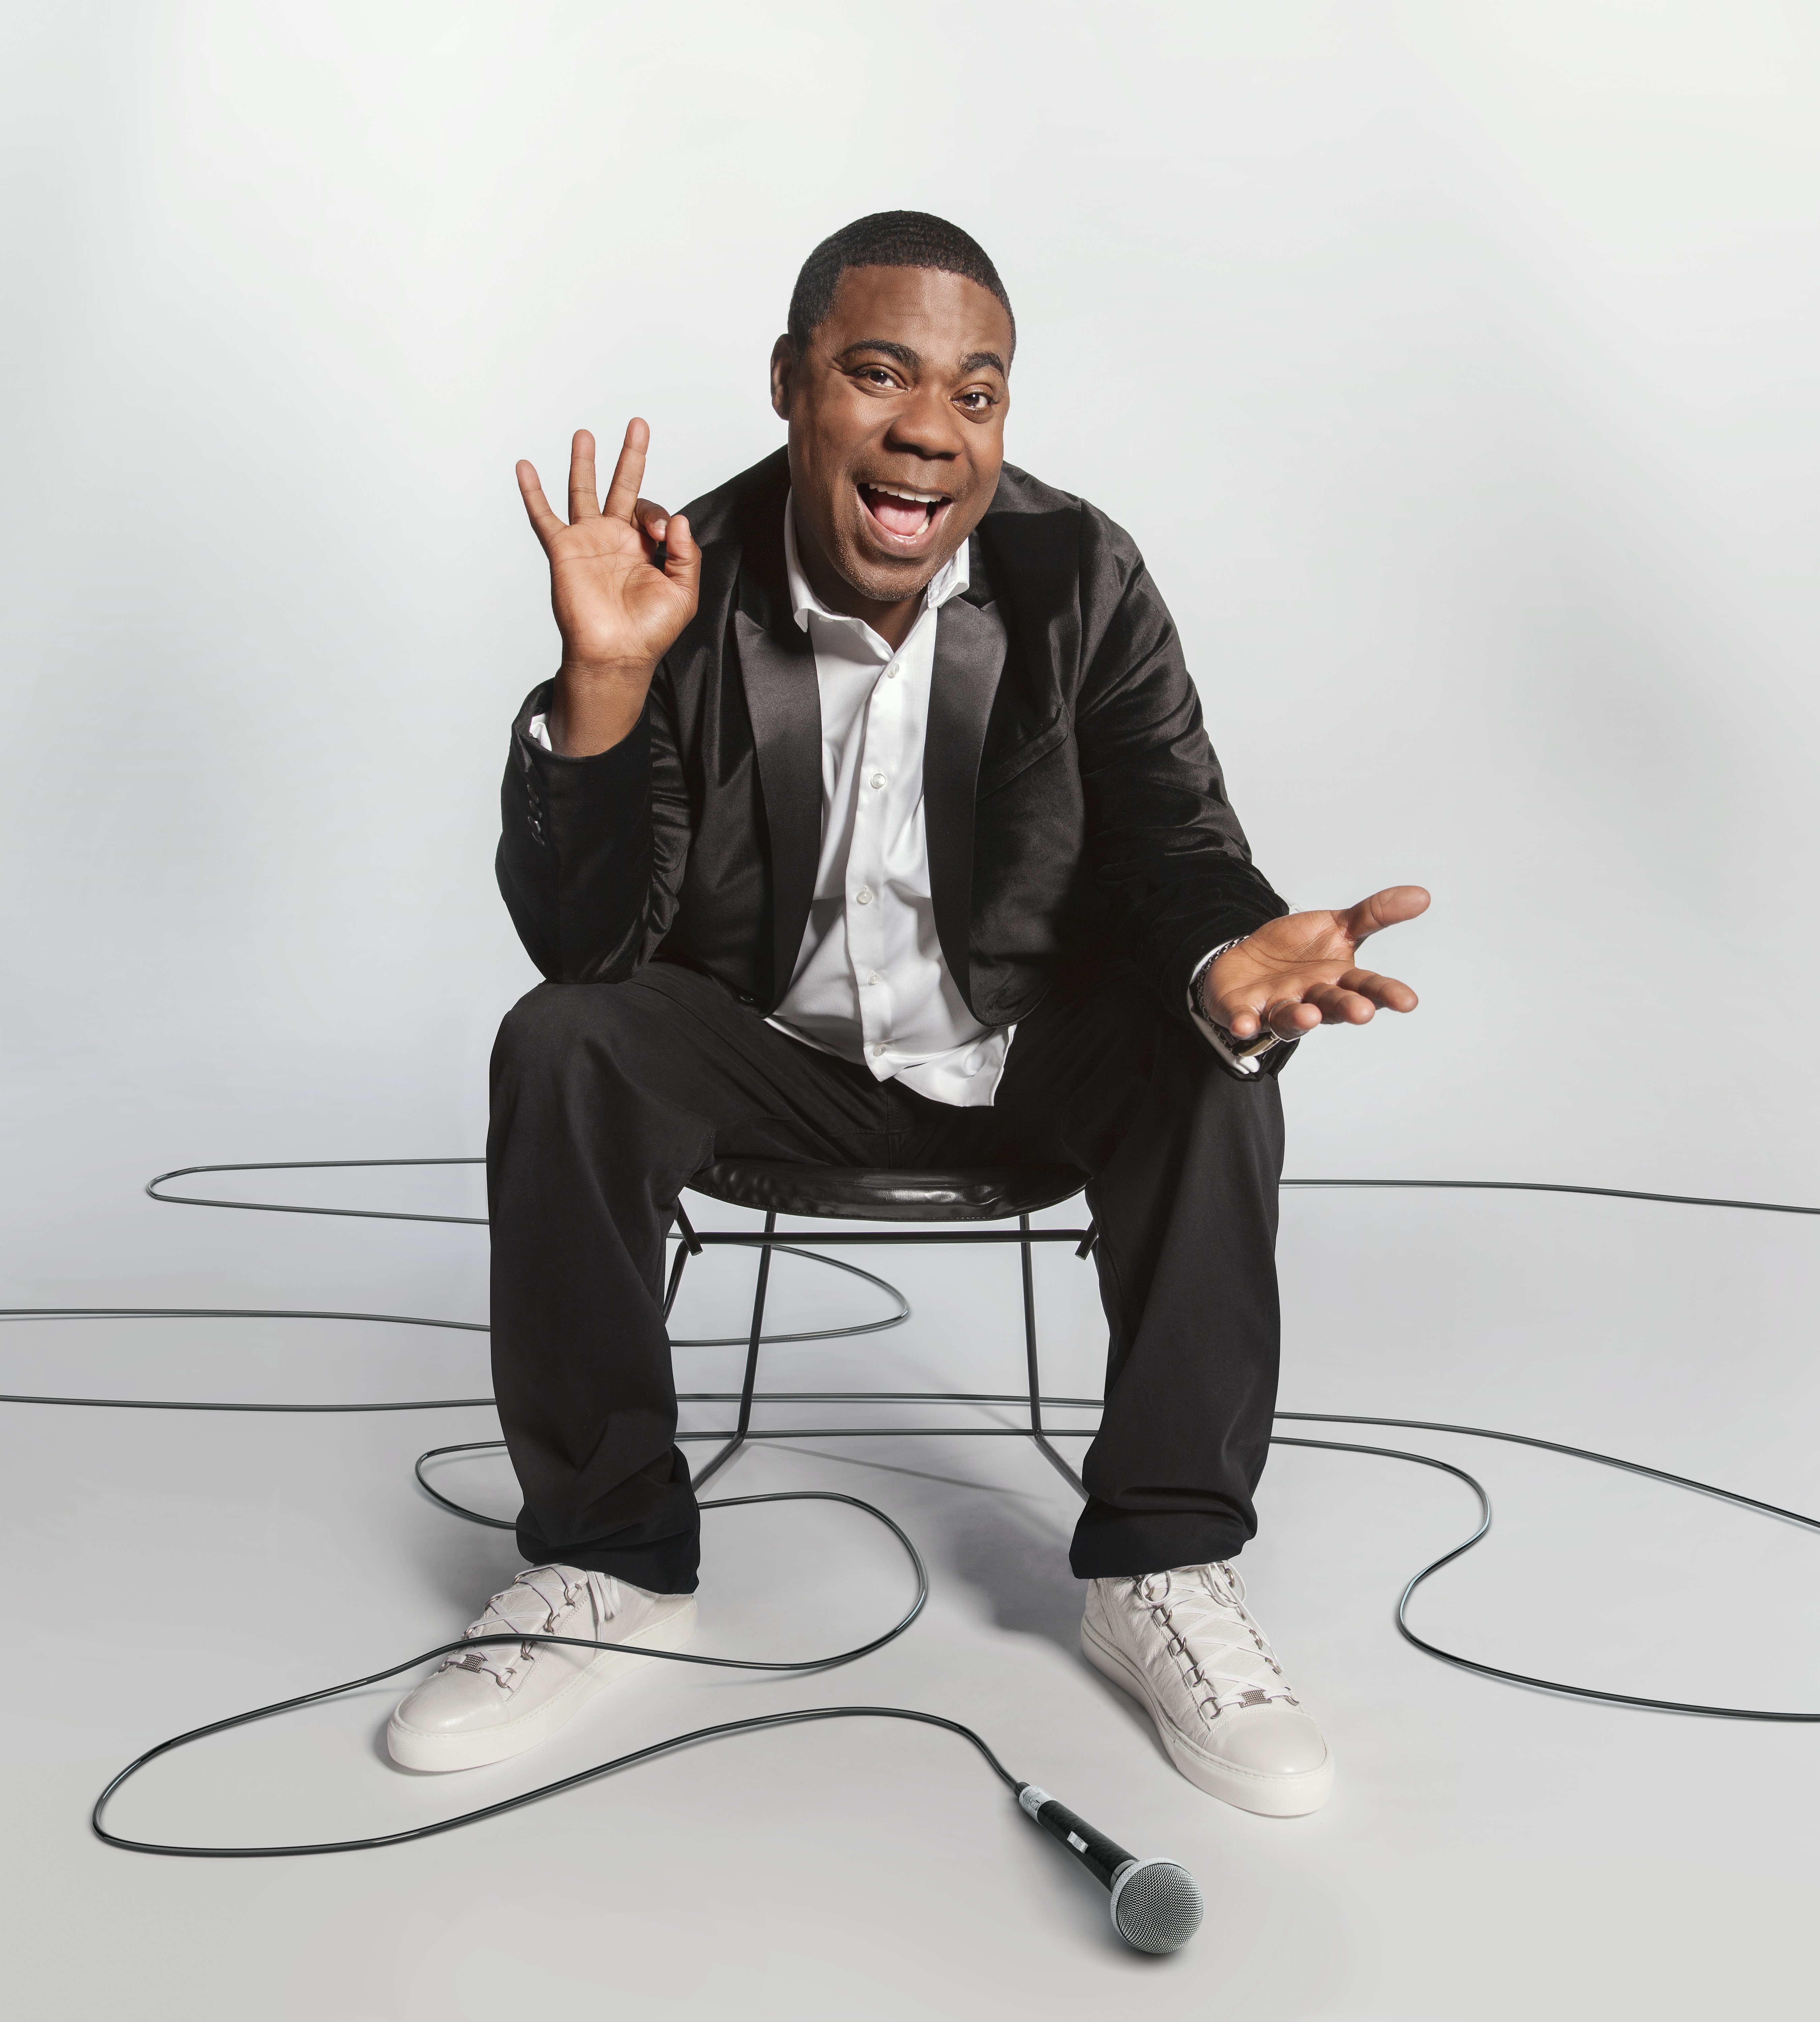 Tracy Morgan hosts the Hot 97 April Fools Comedy Show, April 1, 2016 at The Theater at Madison Square Garden.